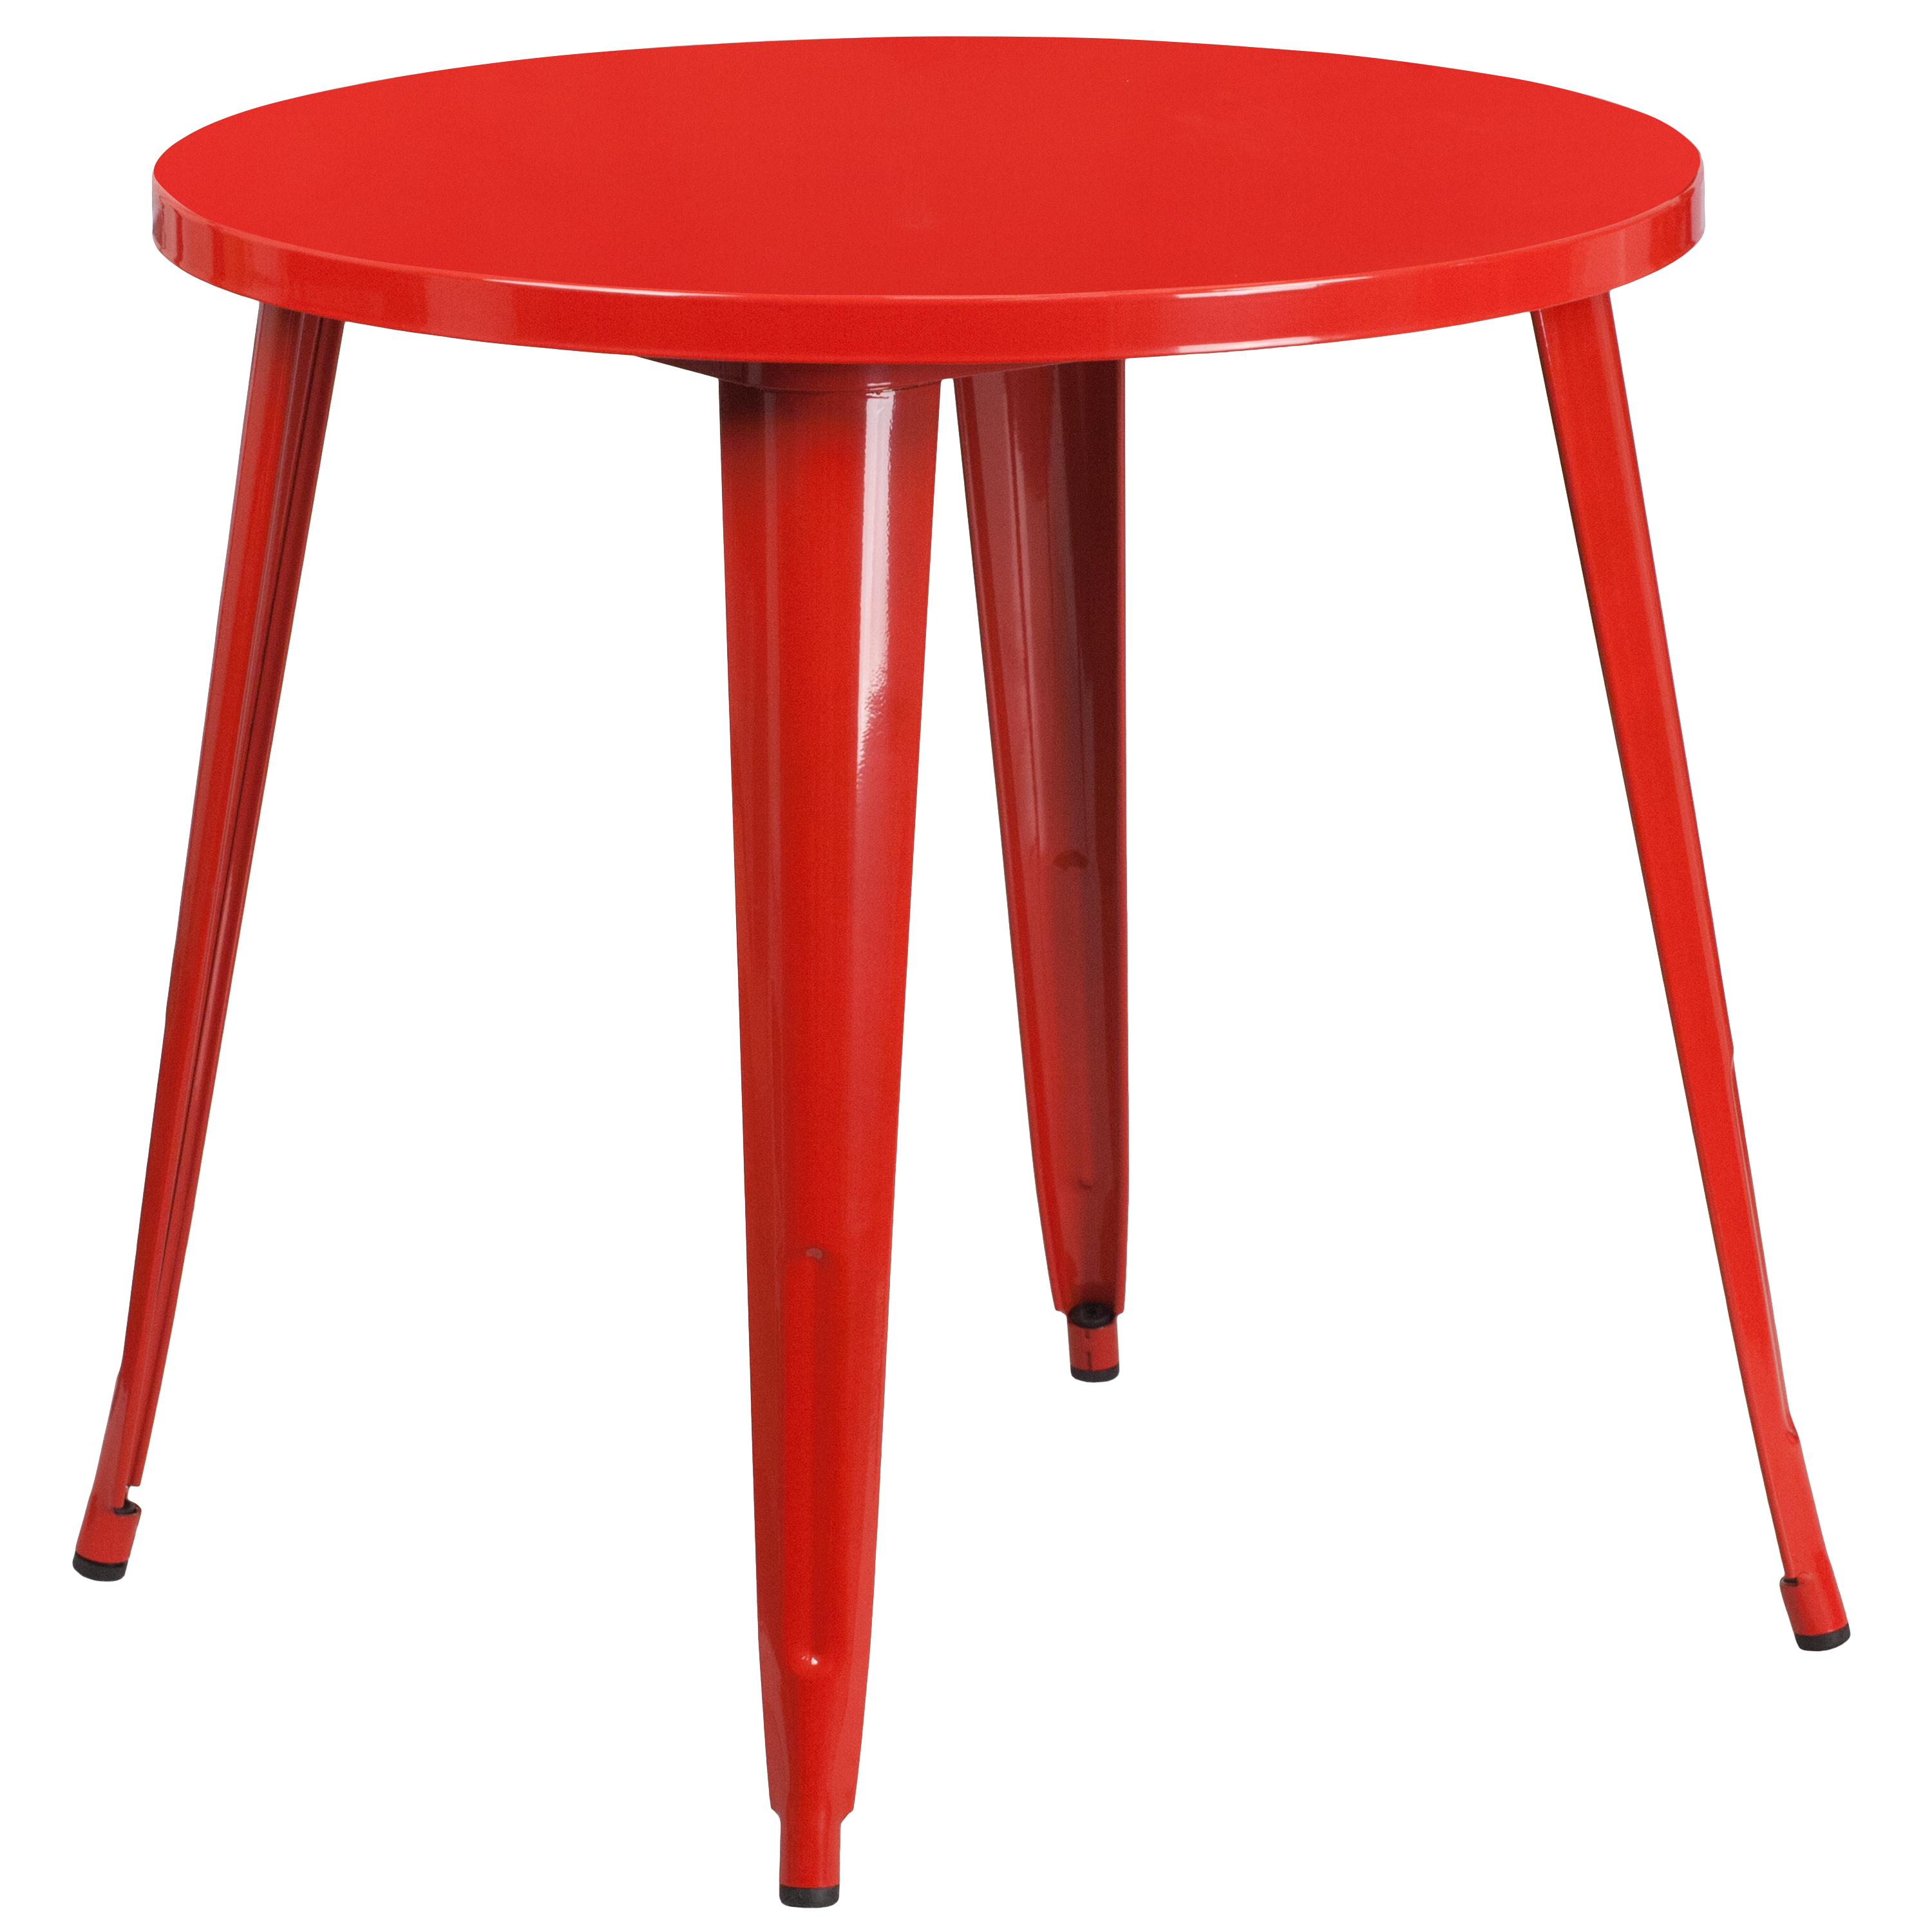 Flash Furniture Commercial Grade 30" Round Red Metal Indoor-Outdoor Table Set with 4 Cafe Chairs - image 4 of 5